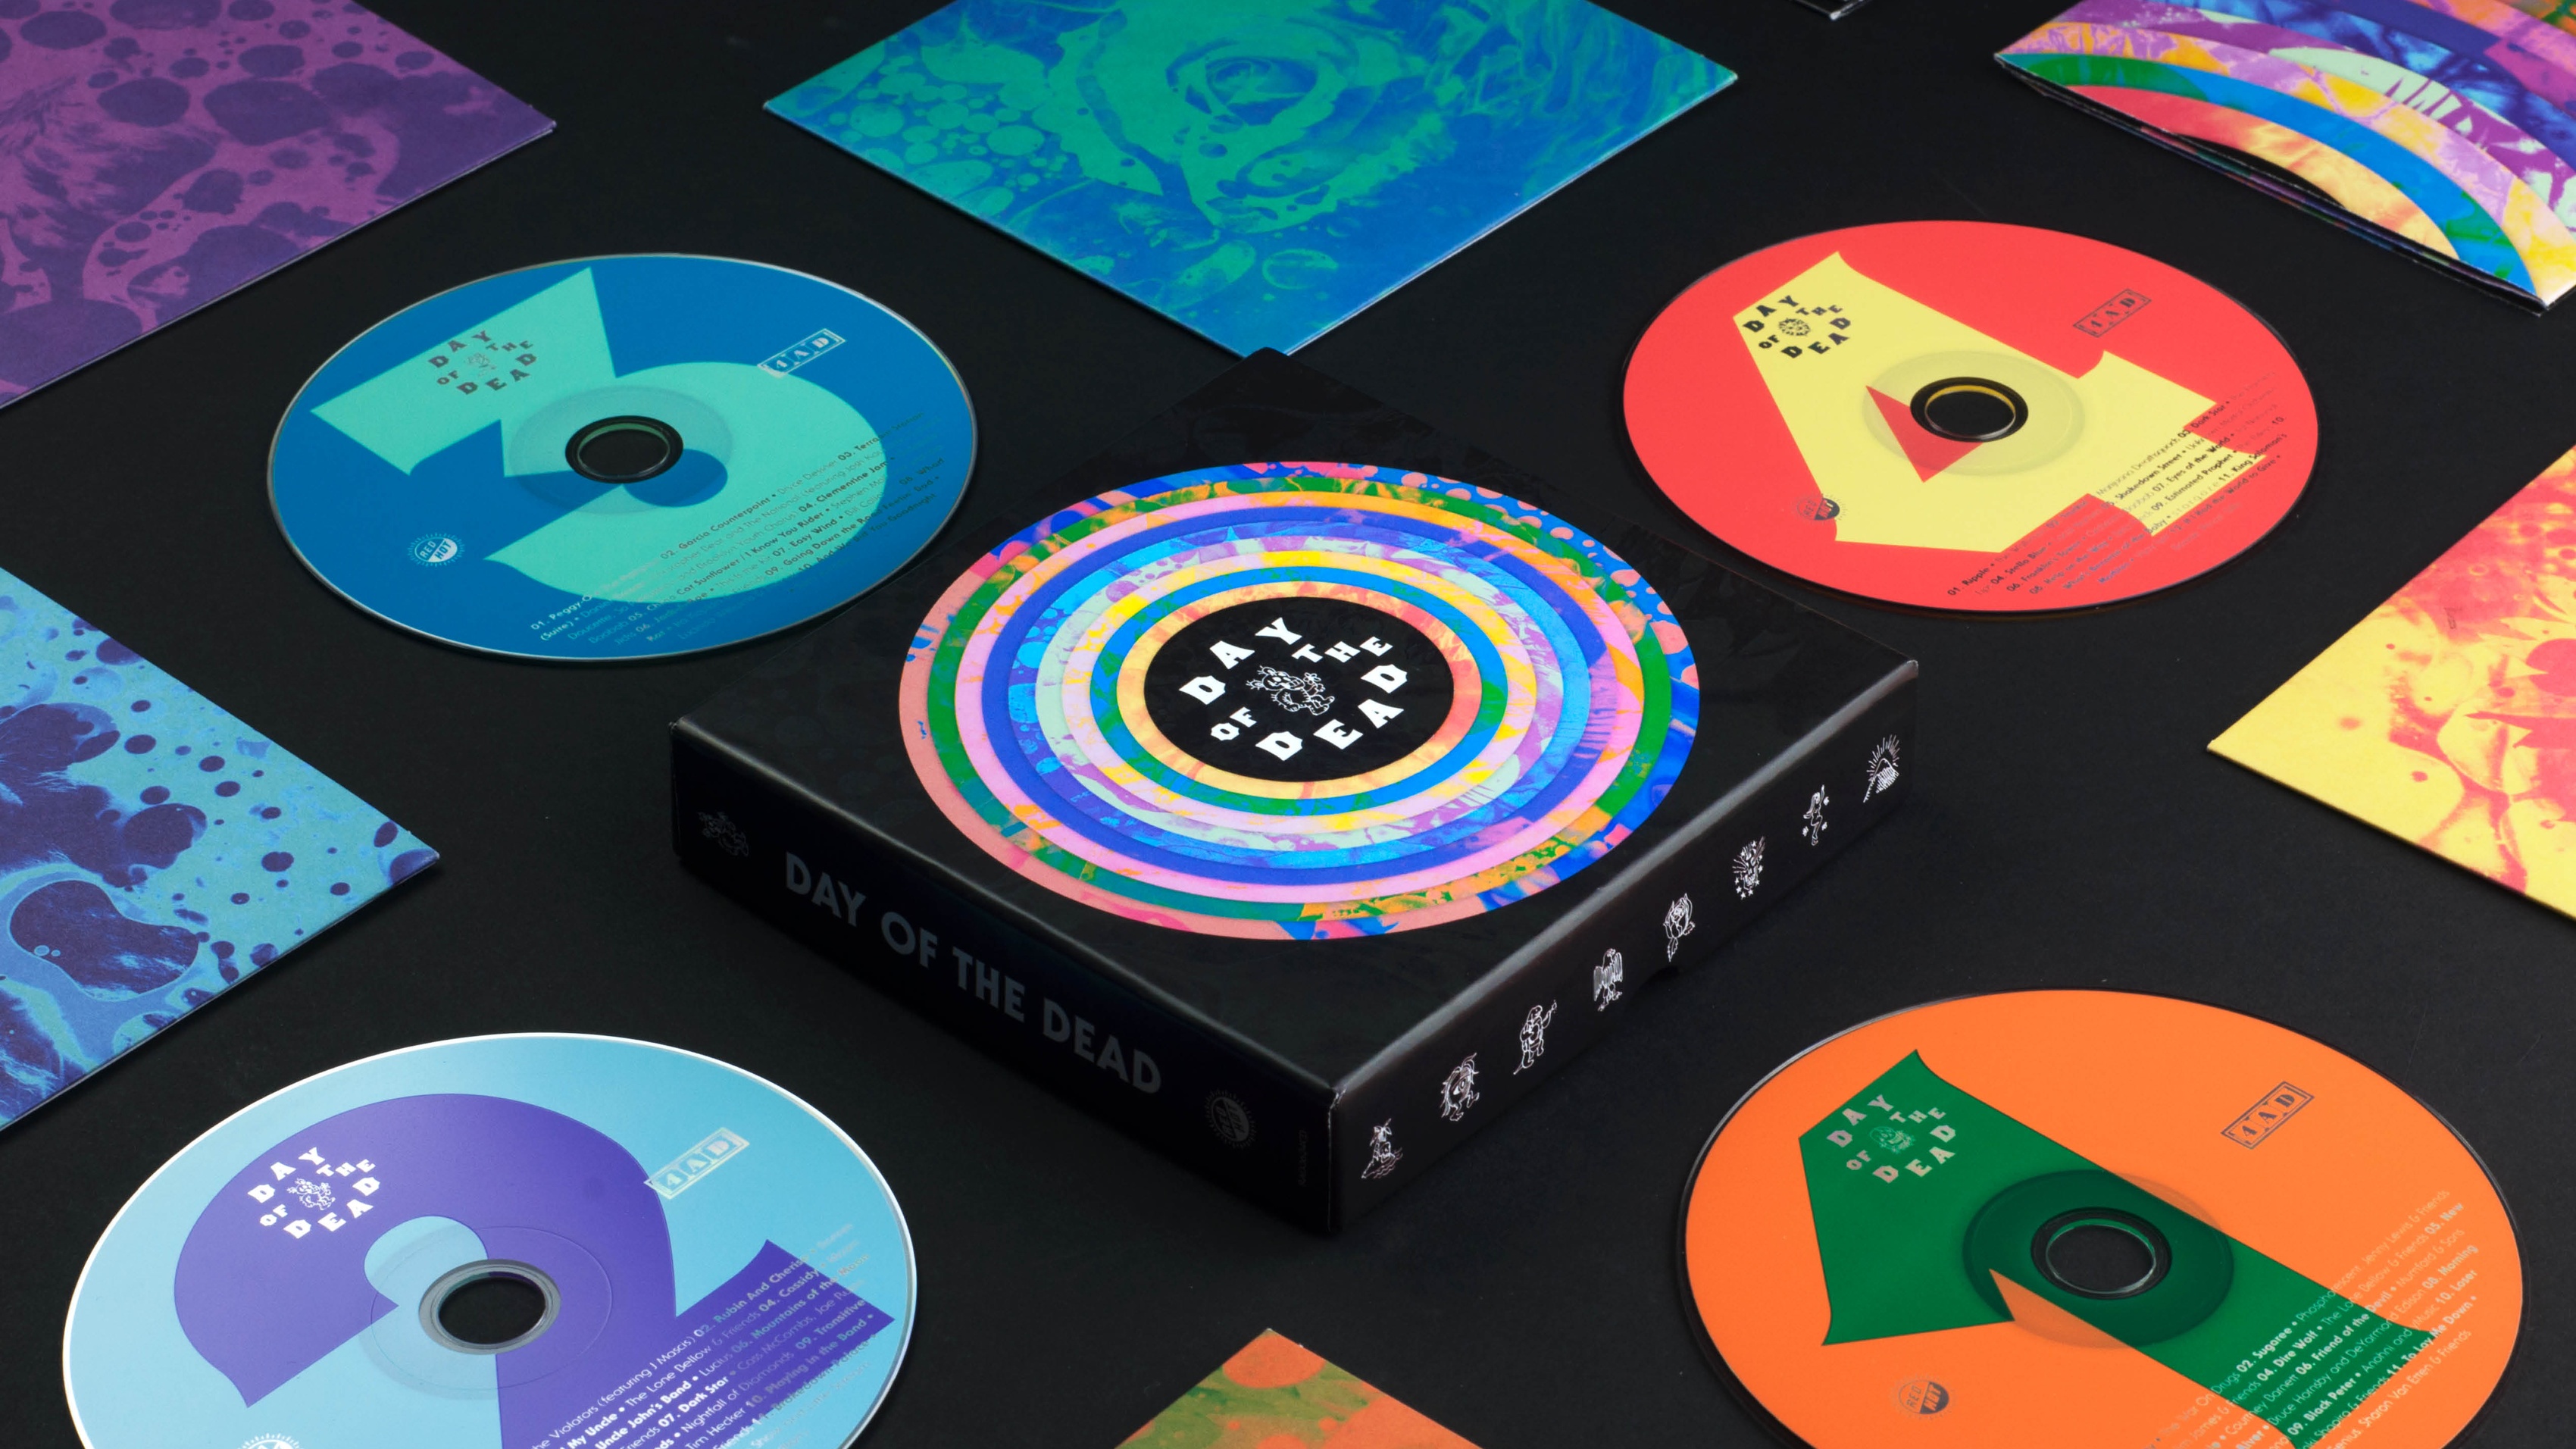 Rendering of the album packaging with the inserts and CDs arranged in a checkerboard pattern